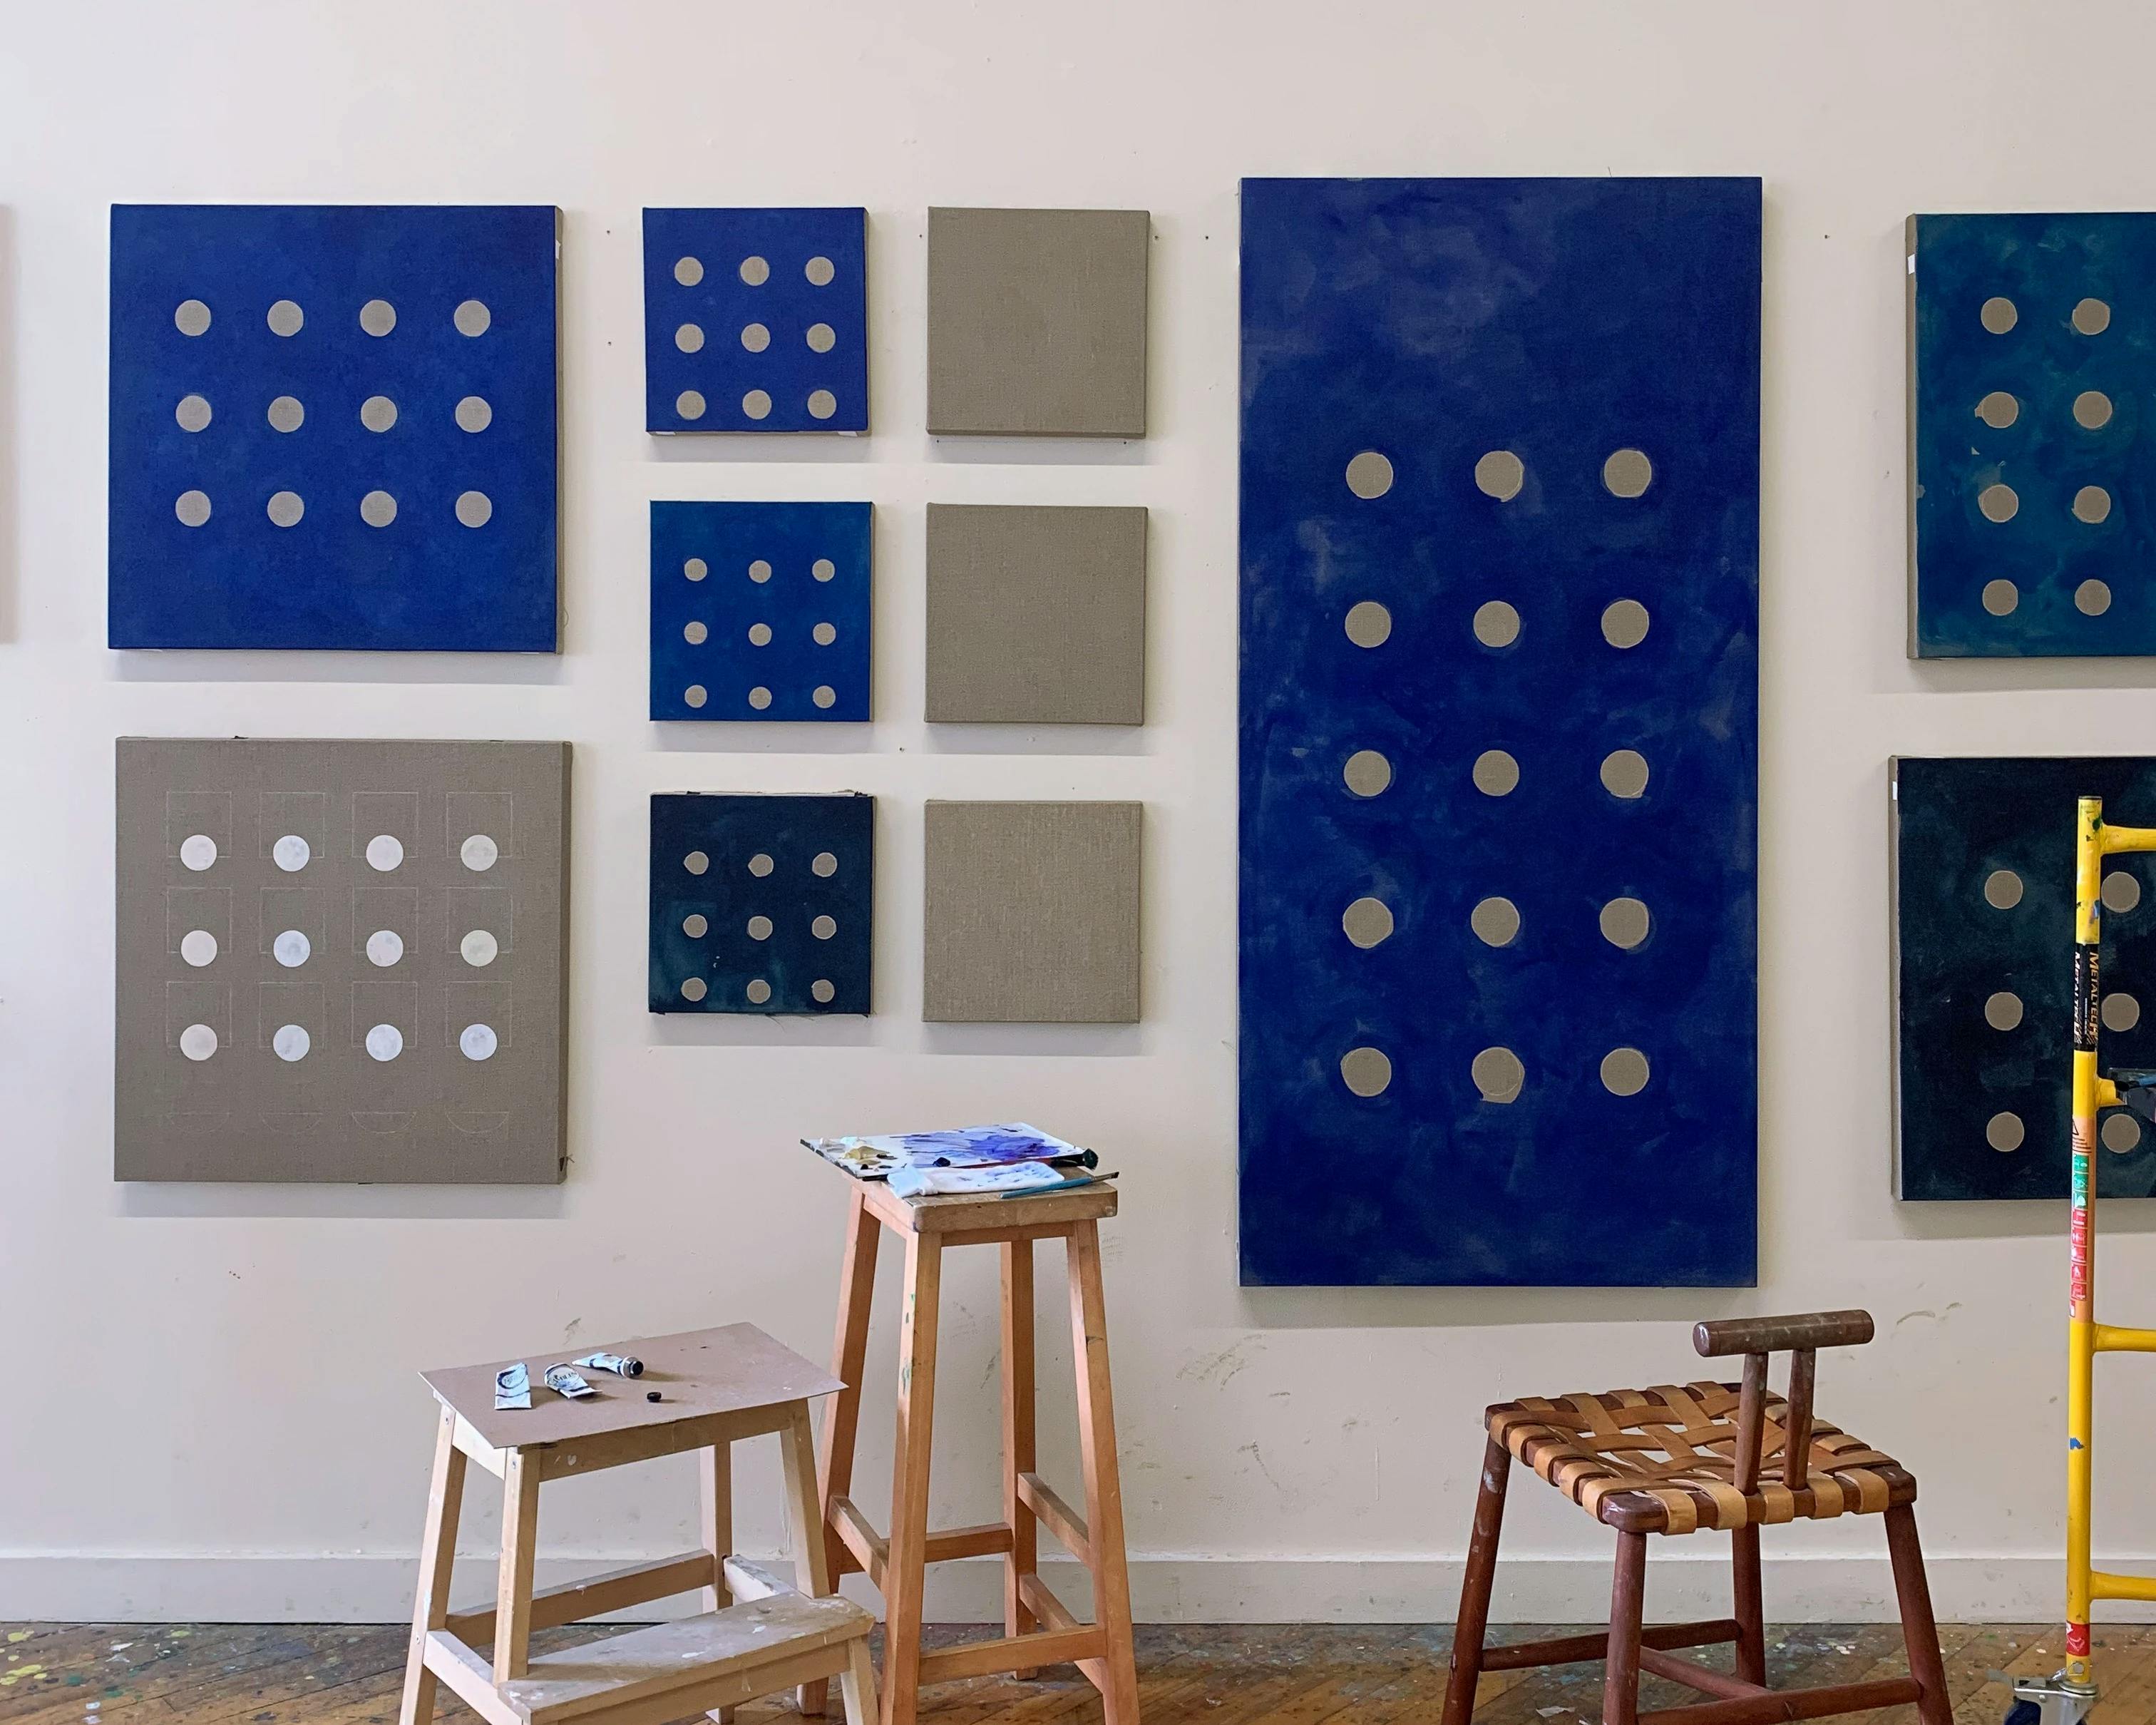 Minimalist, blue and grey paintings with grids of circles by artist Carla Weeks installed on a white wall in her studio.